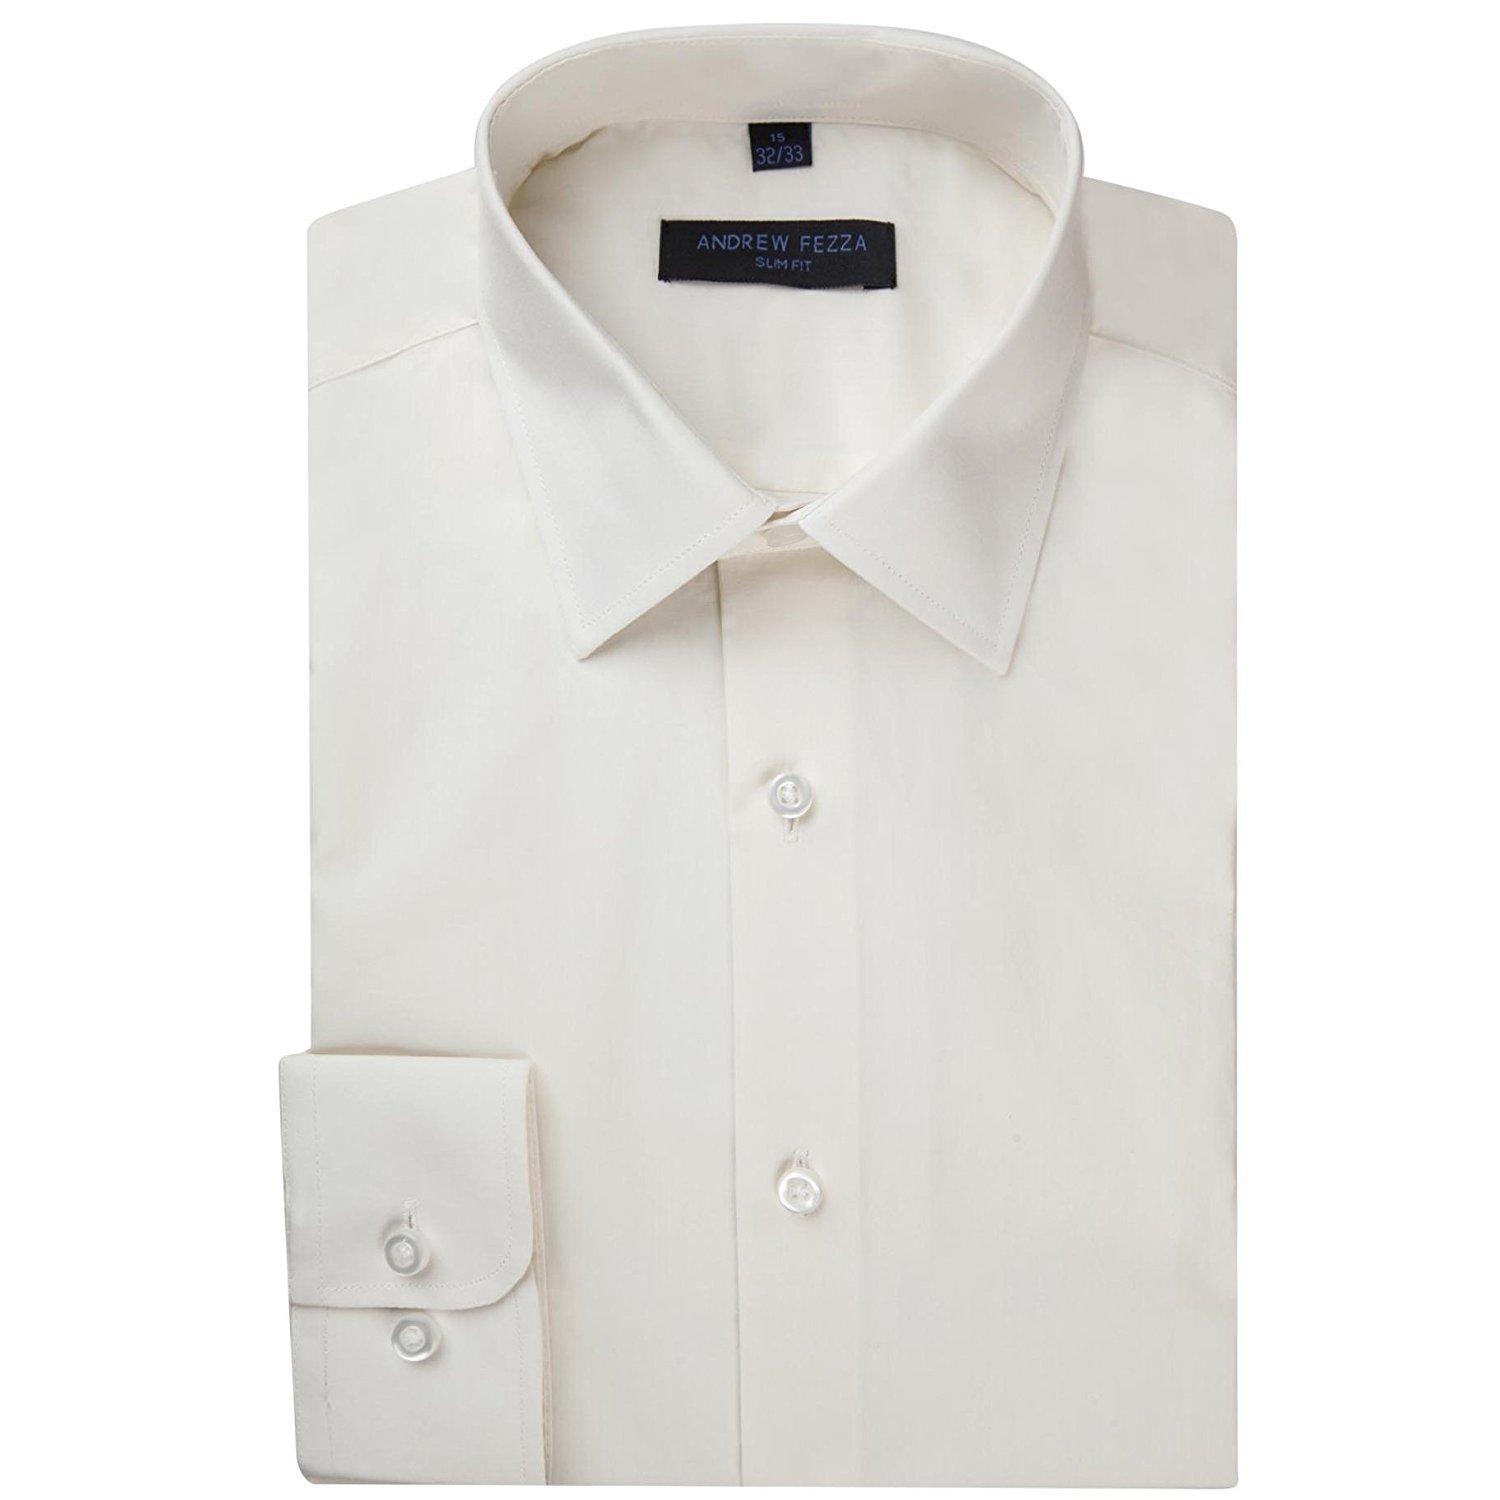 Andrew Fezza Men's Slim Fit Long Sleeve Solid Cotton Dress Shirt ...